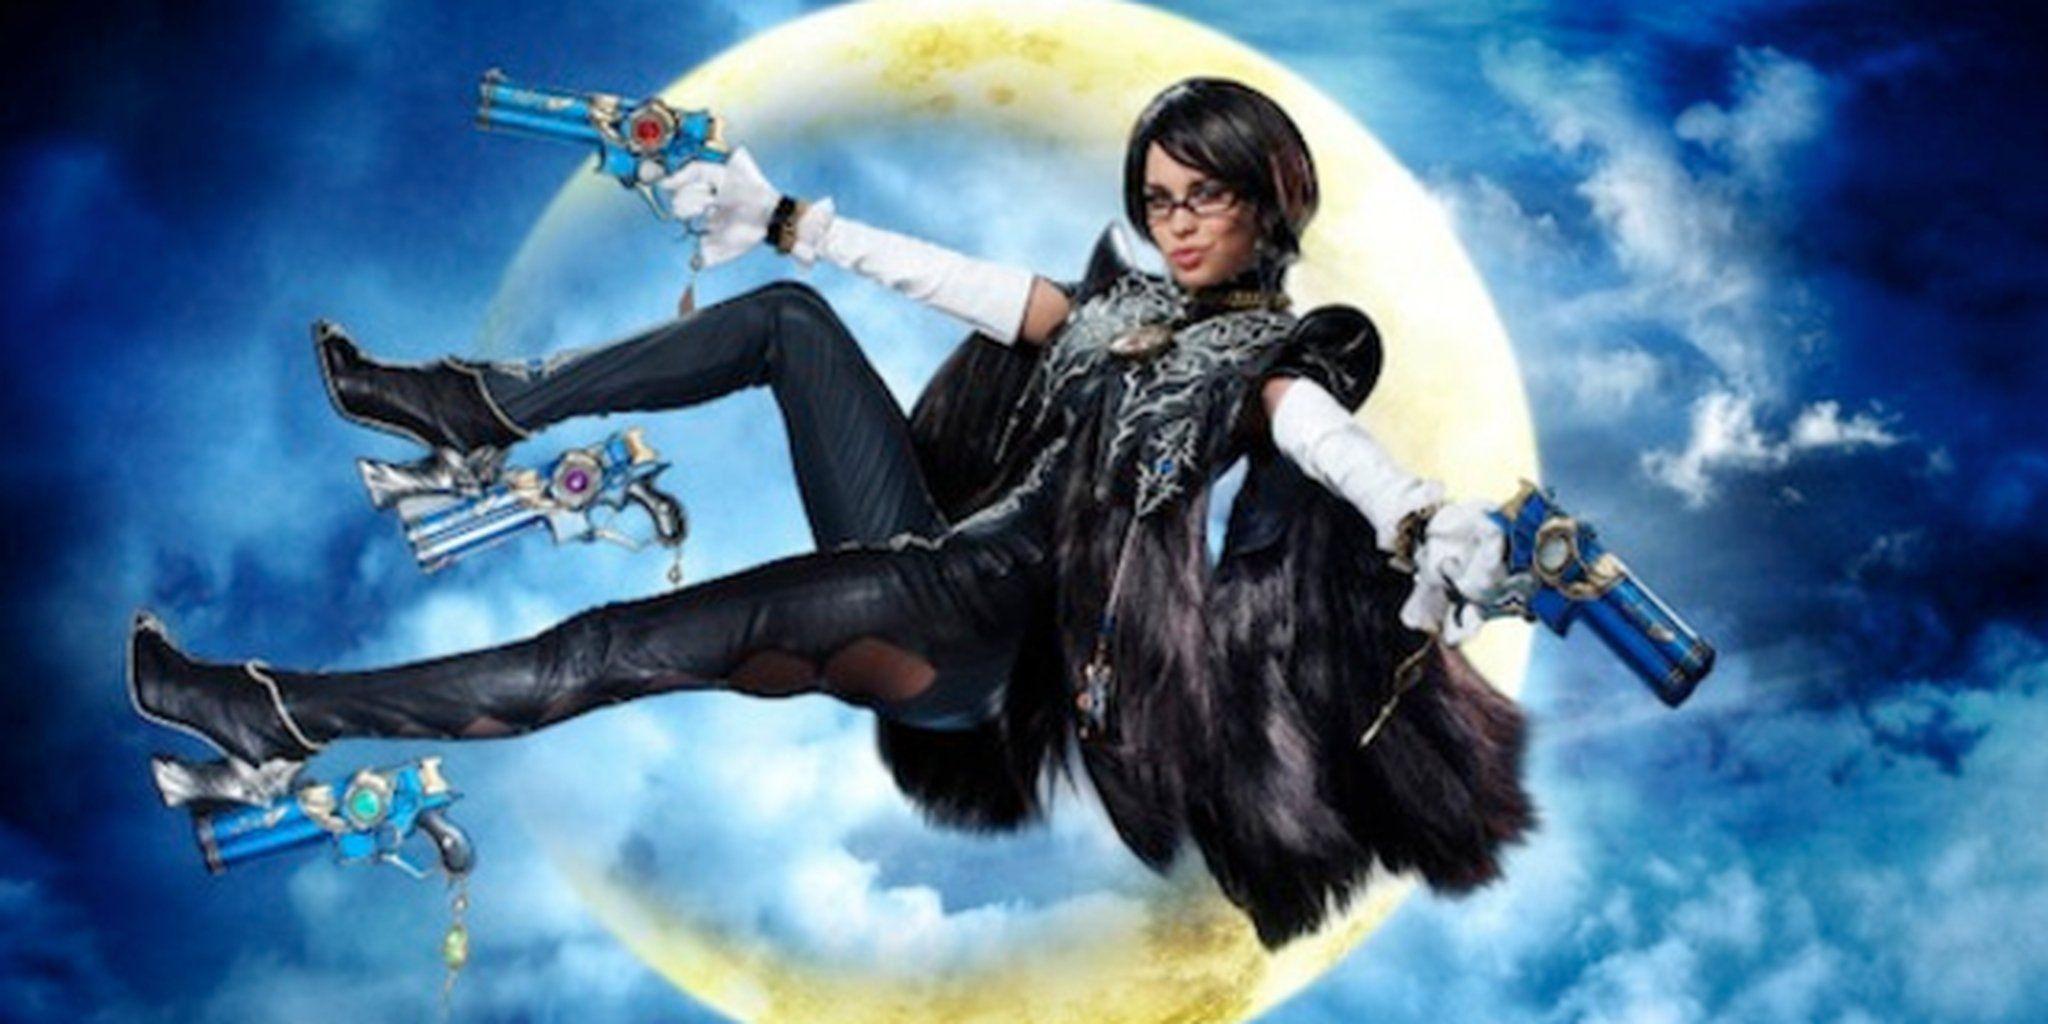 Bayonetta 2 Hd Wallpapers For Pc